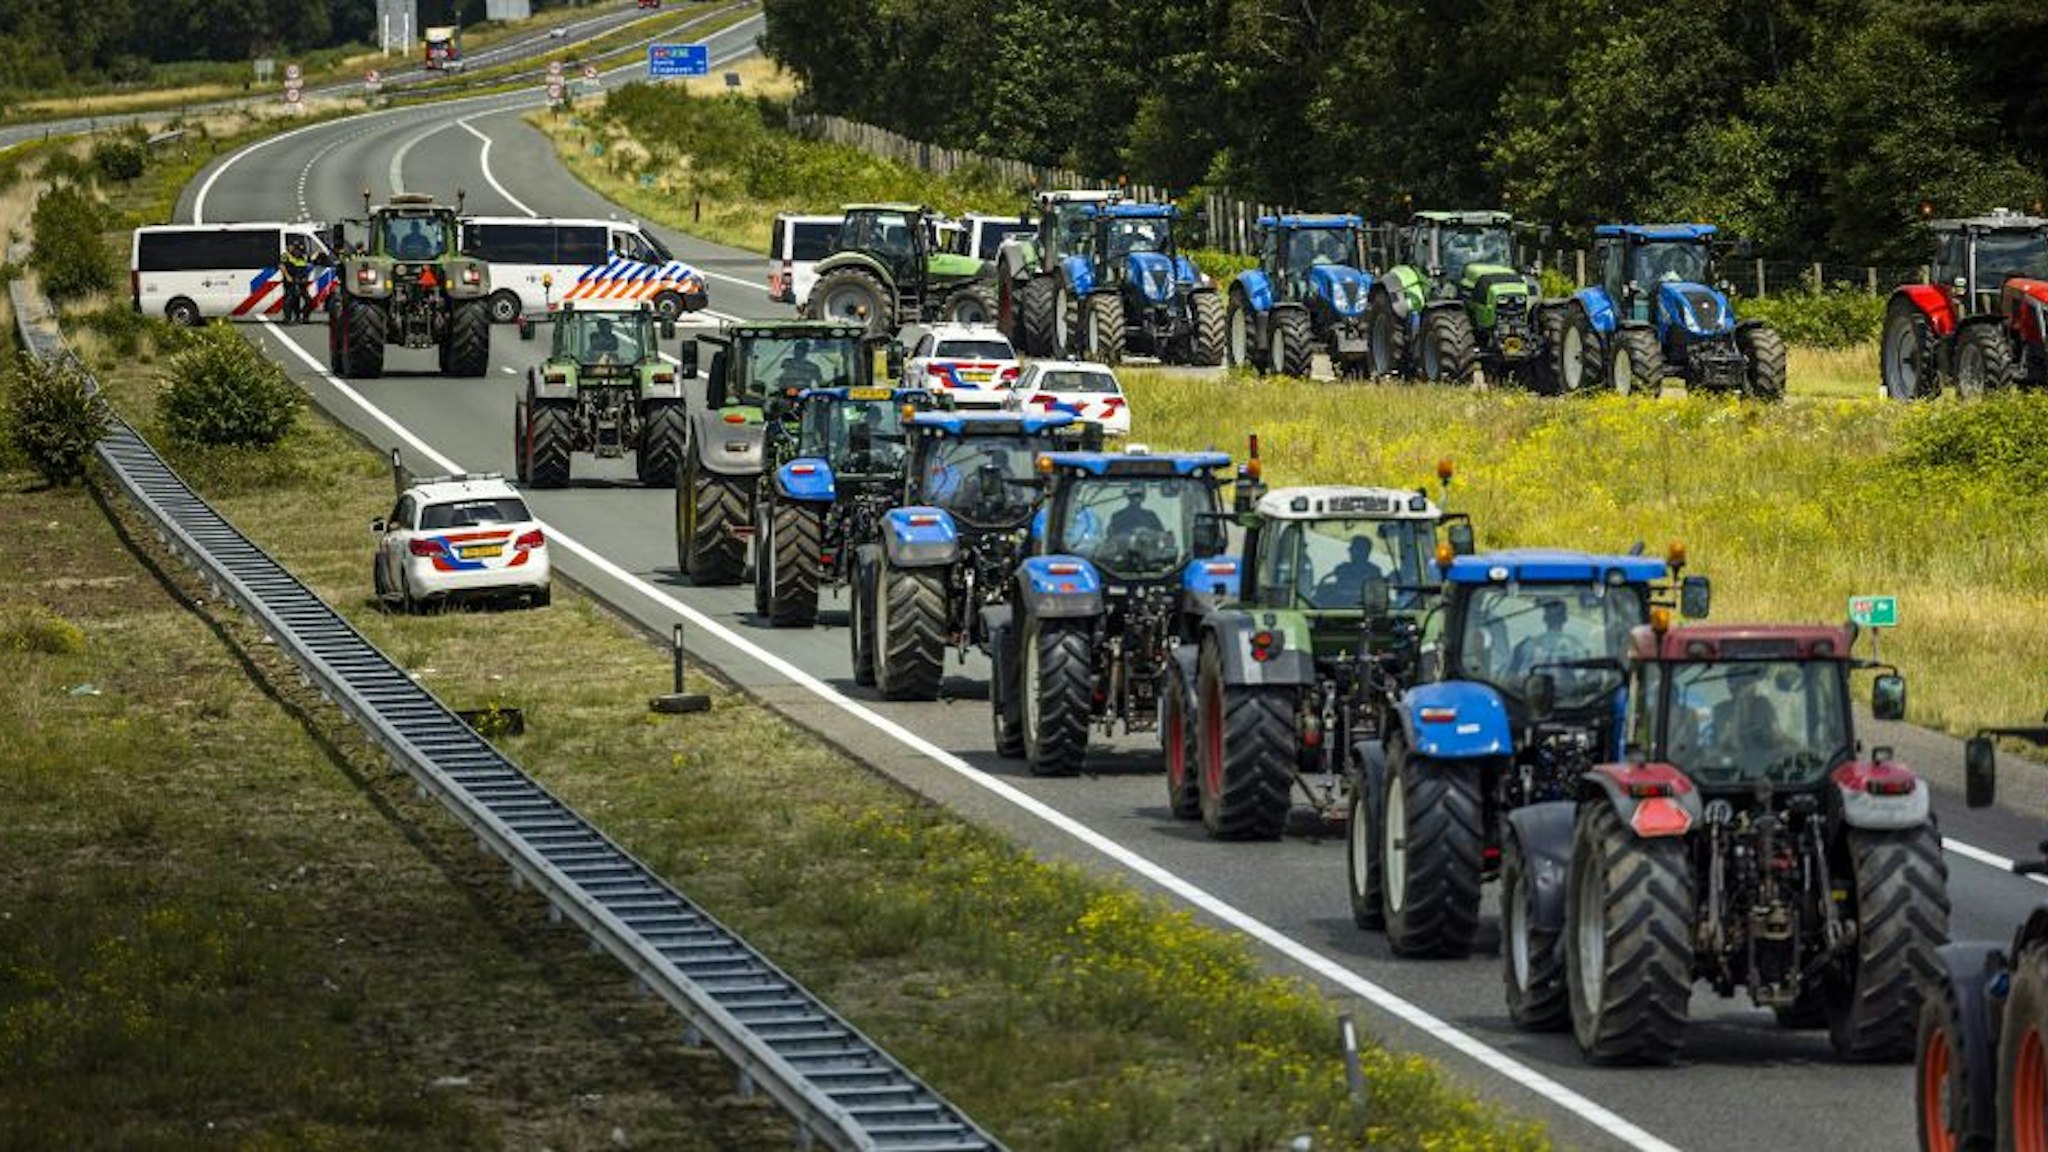 Farmers take part in a blockade of the A67 near Eindhoven to protest against government plans that may require them to use less fertilizer and reduce livestock at Hapert, on July 4, 2022. - Netherlands OUT (Photo by ROB ENGELAAR / ANP / AFP) / Netherlands OUT (